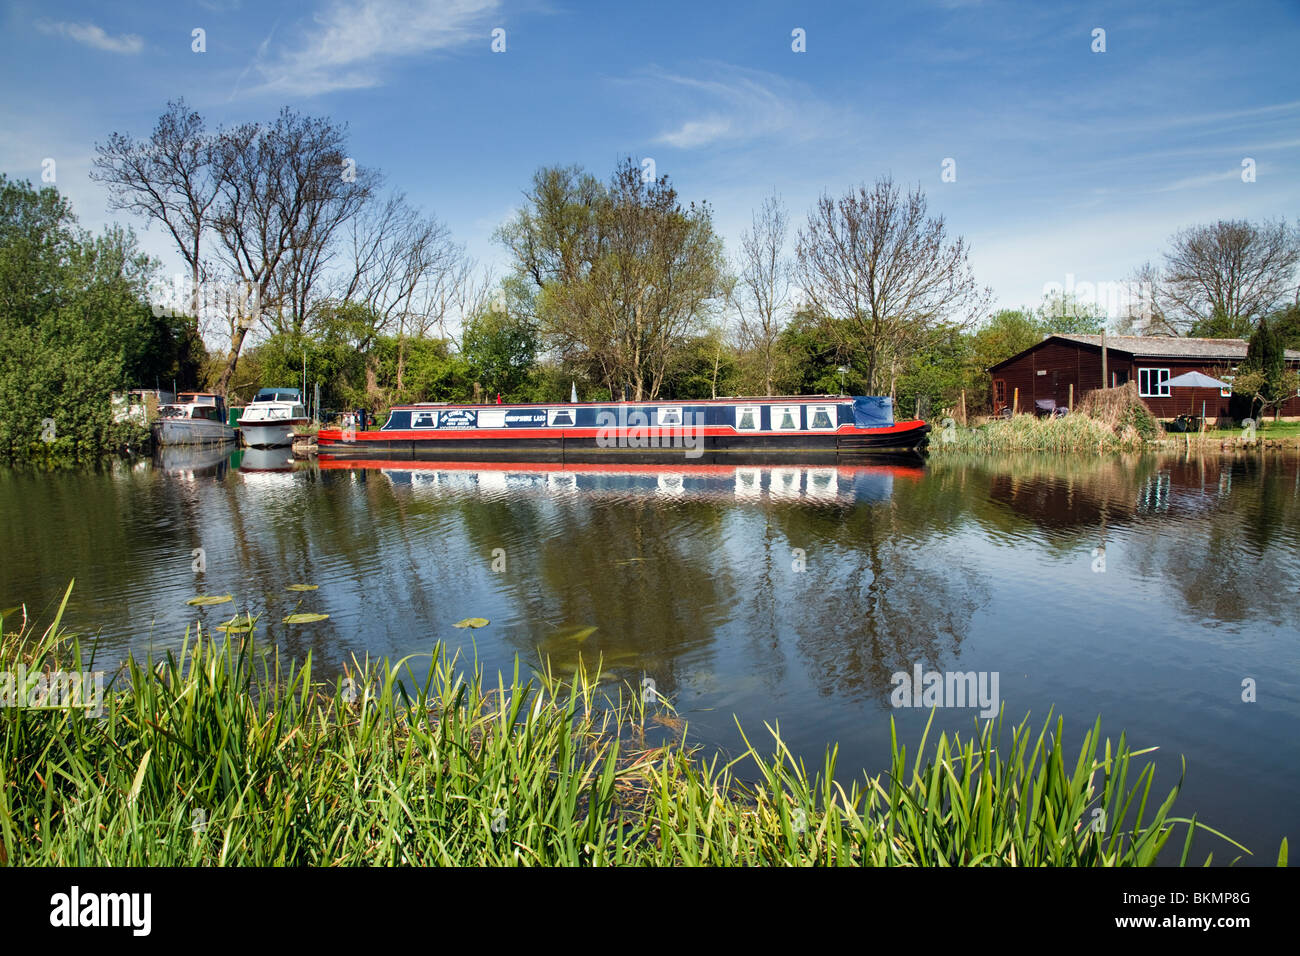 The River Ouse A Longboat Barge Near Houghton Village In Cambridgeshire, East Anglia England The United Kingdom UK Stock Photo